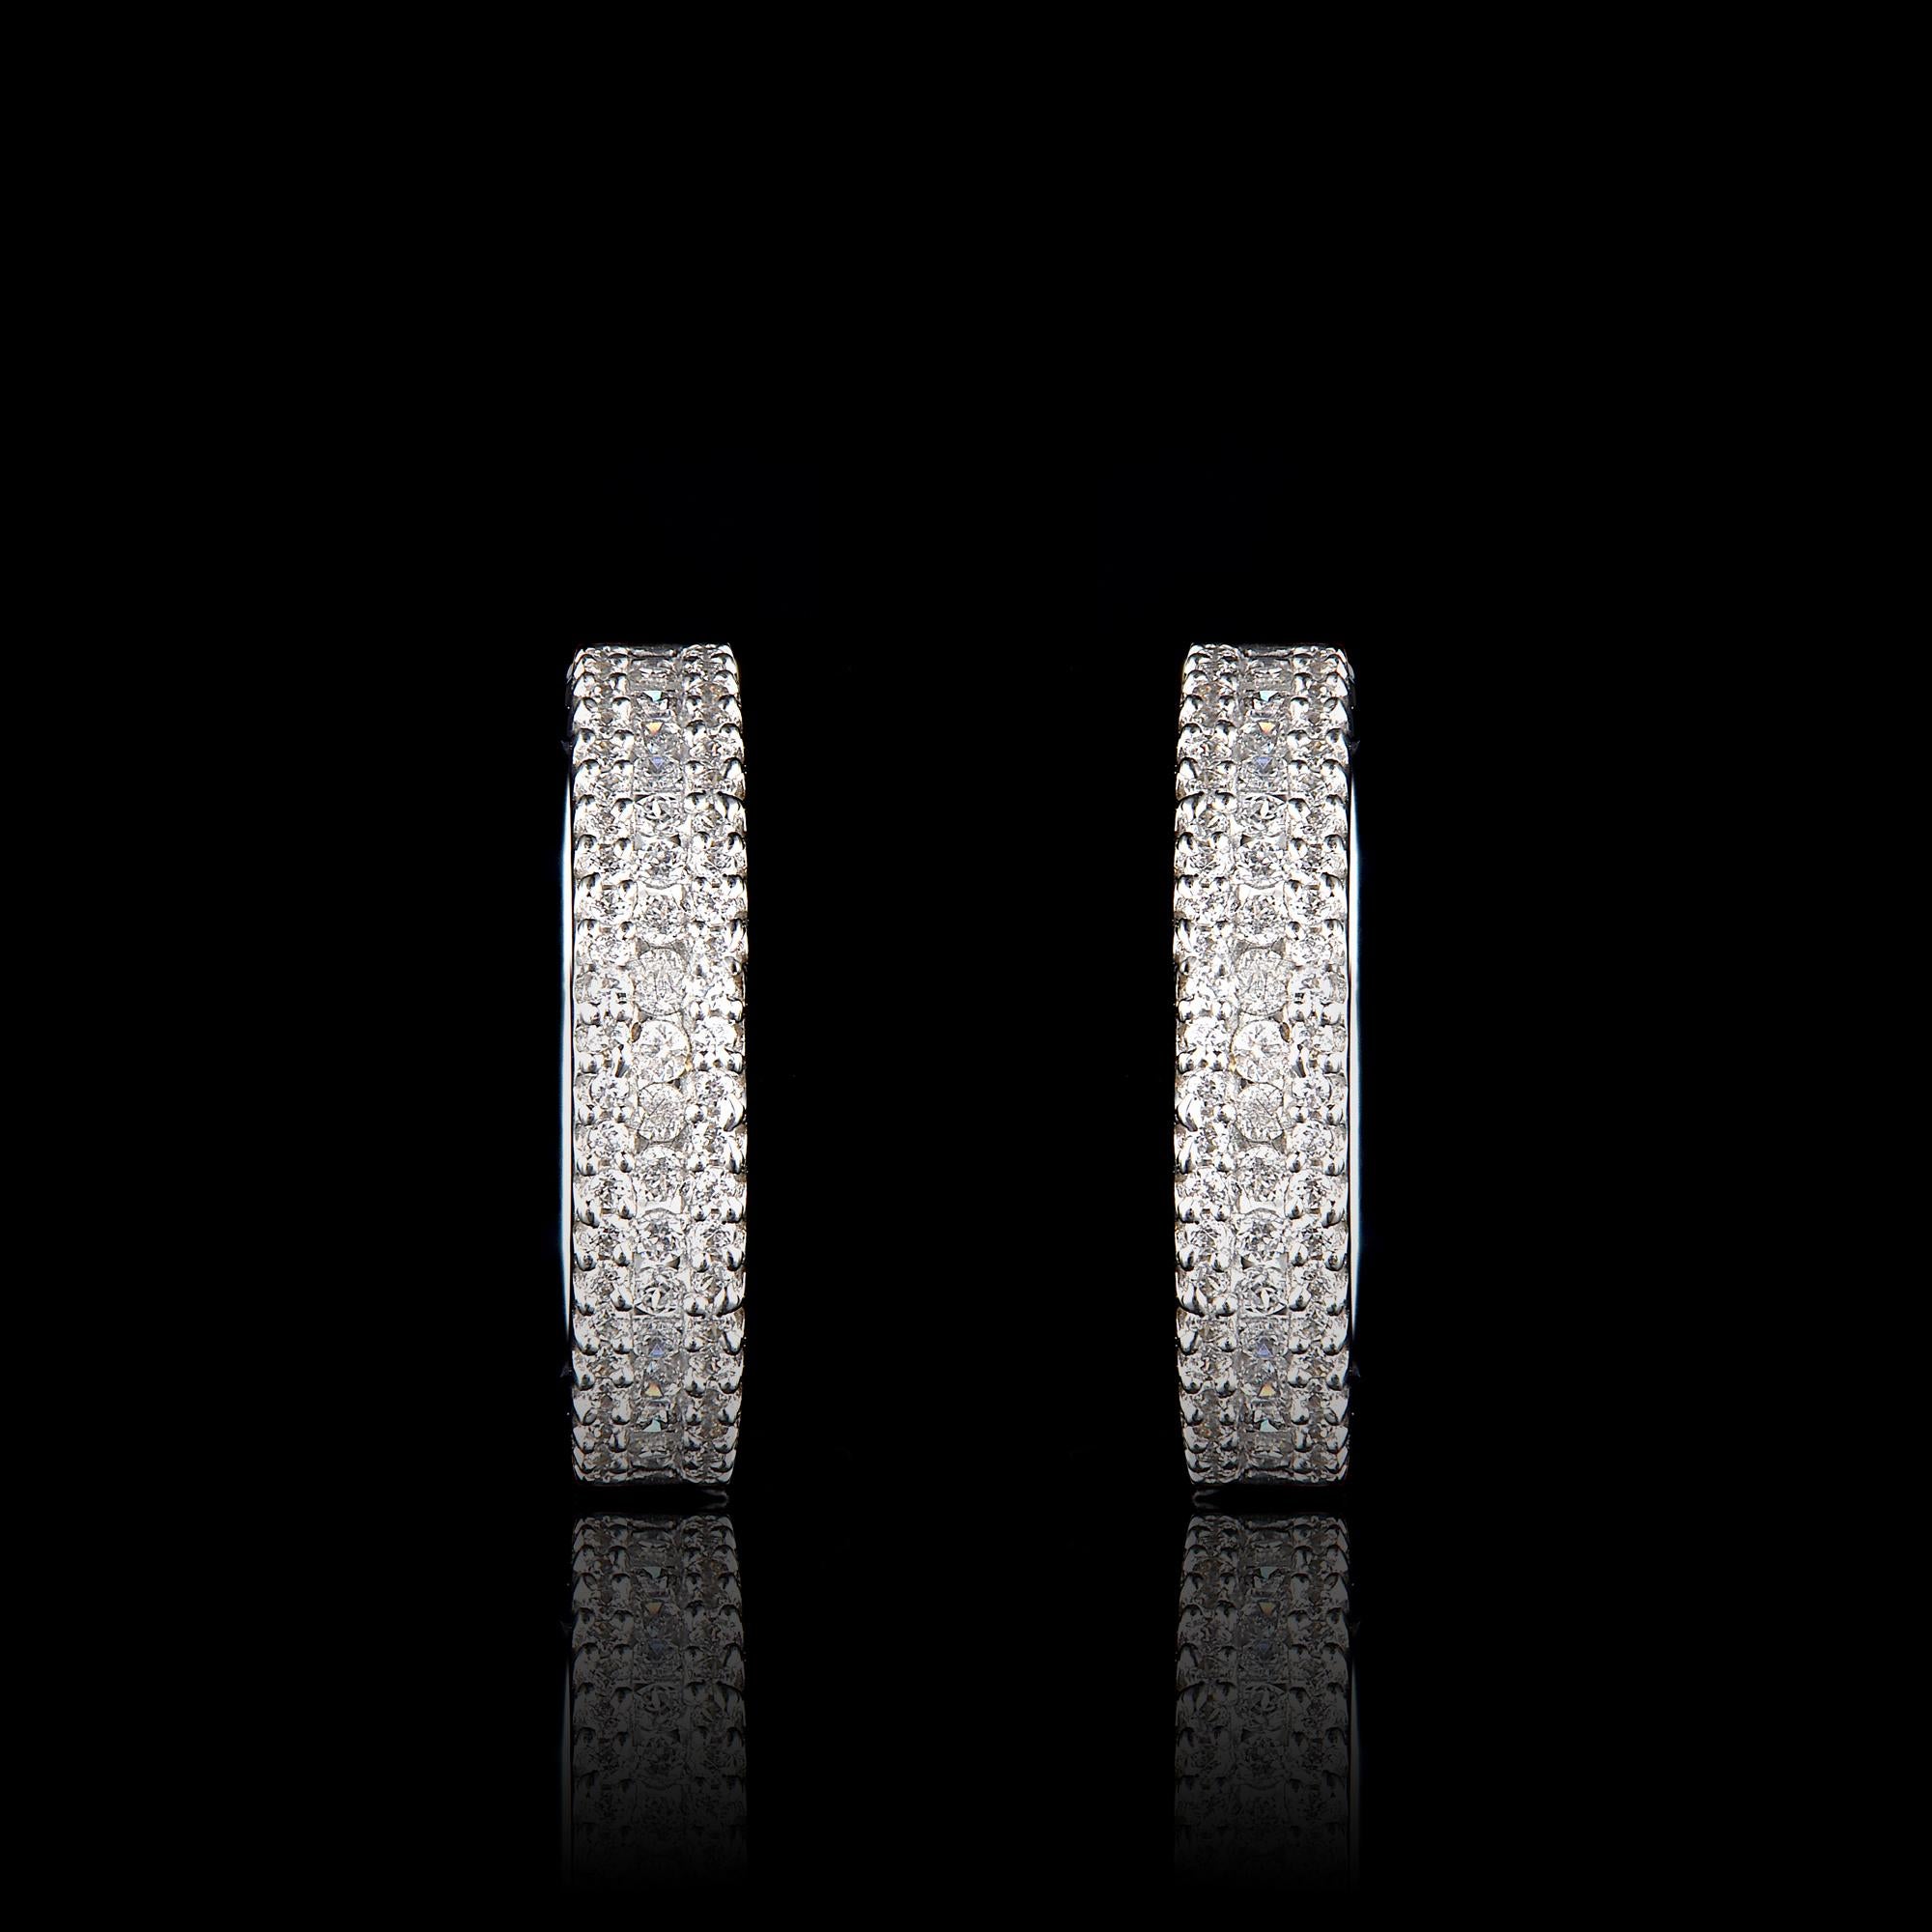 Classic and stylish diamond studded hoop earrings! perfect for daily wear. Crafted in 14 Karat white gold with 110 brilliant cut & single cut diamond in prong and channel setting. These earring secure with hinged backs. The white diamonds are graded